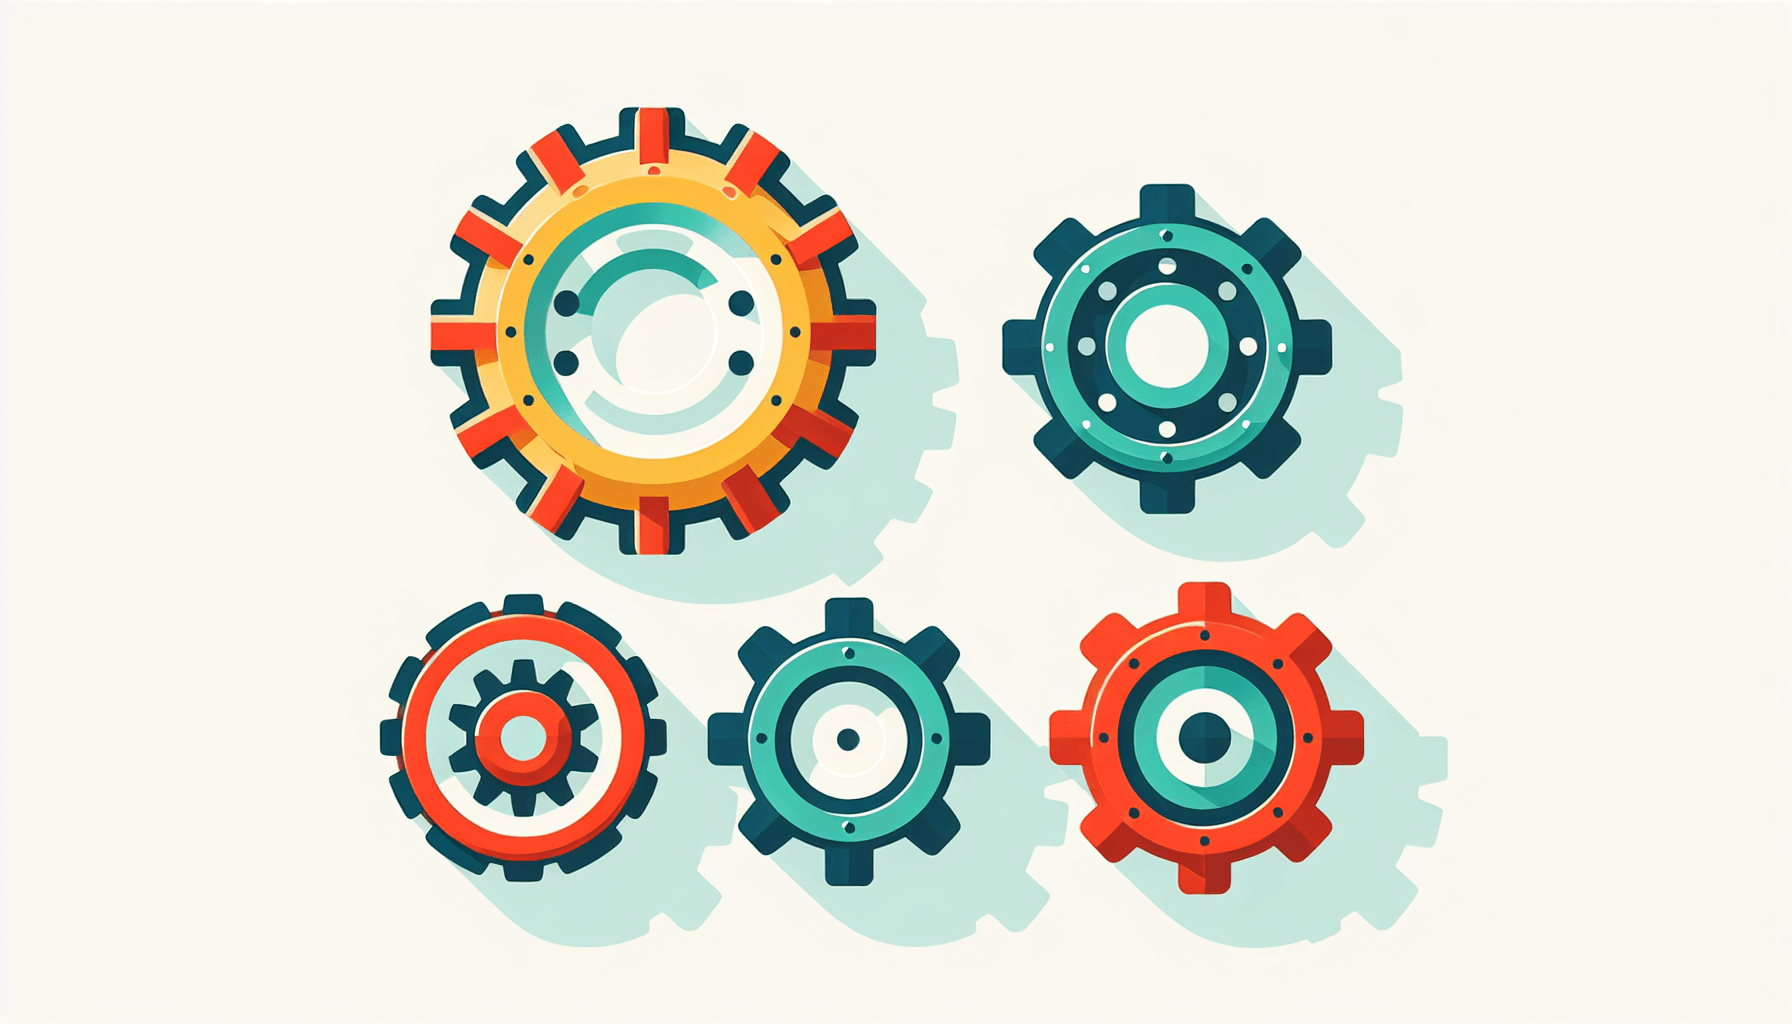 Gears in flat illustration style and white background, red #f47574, green #88c7a8, yellow #fcc44b, and blue #645bc8 colors.